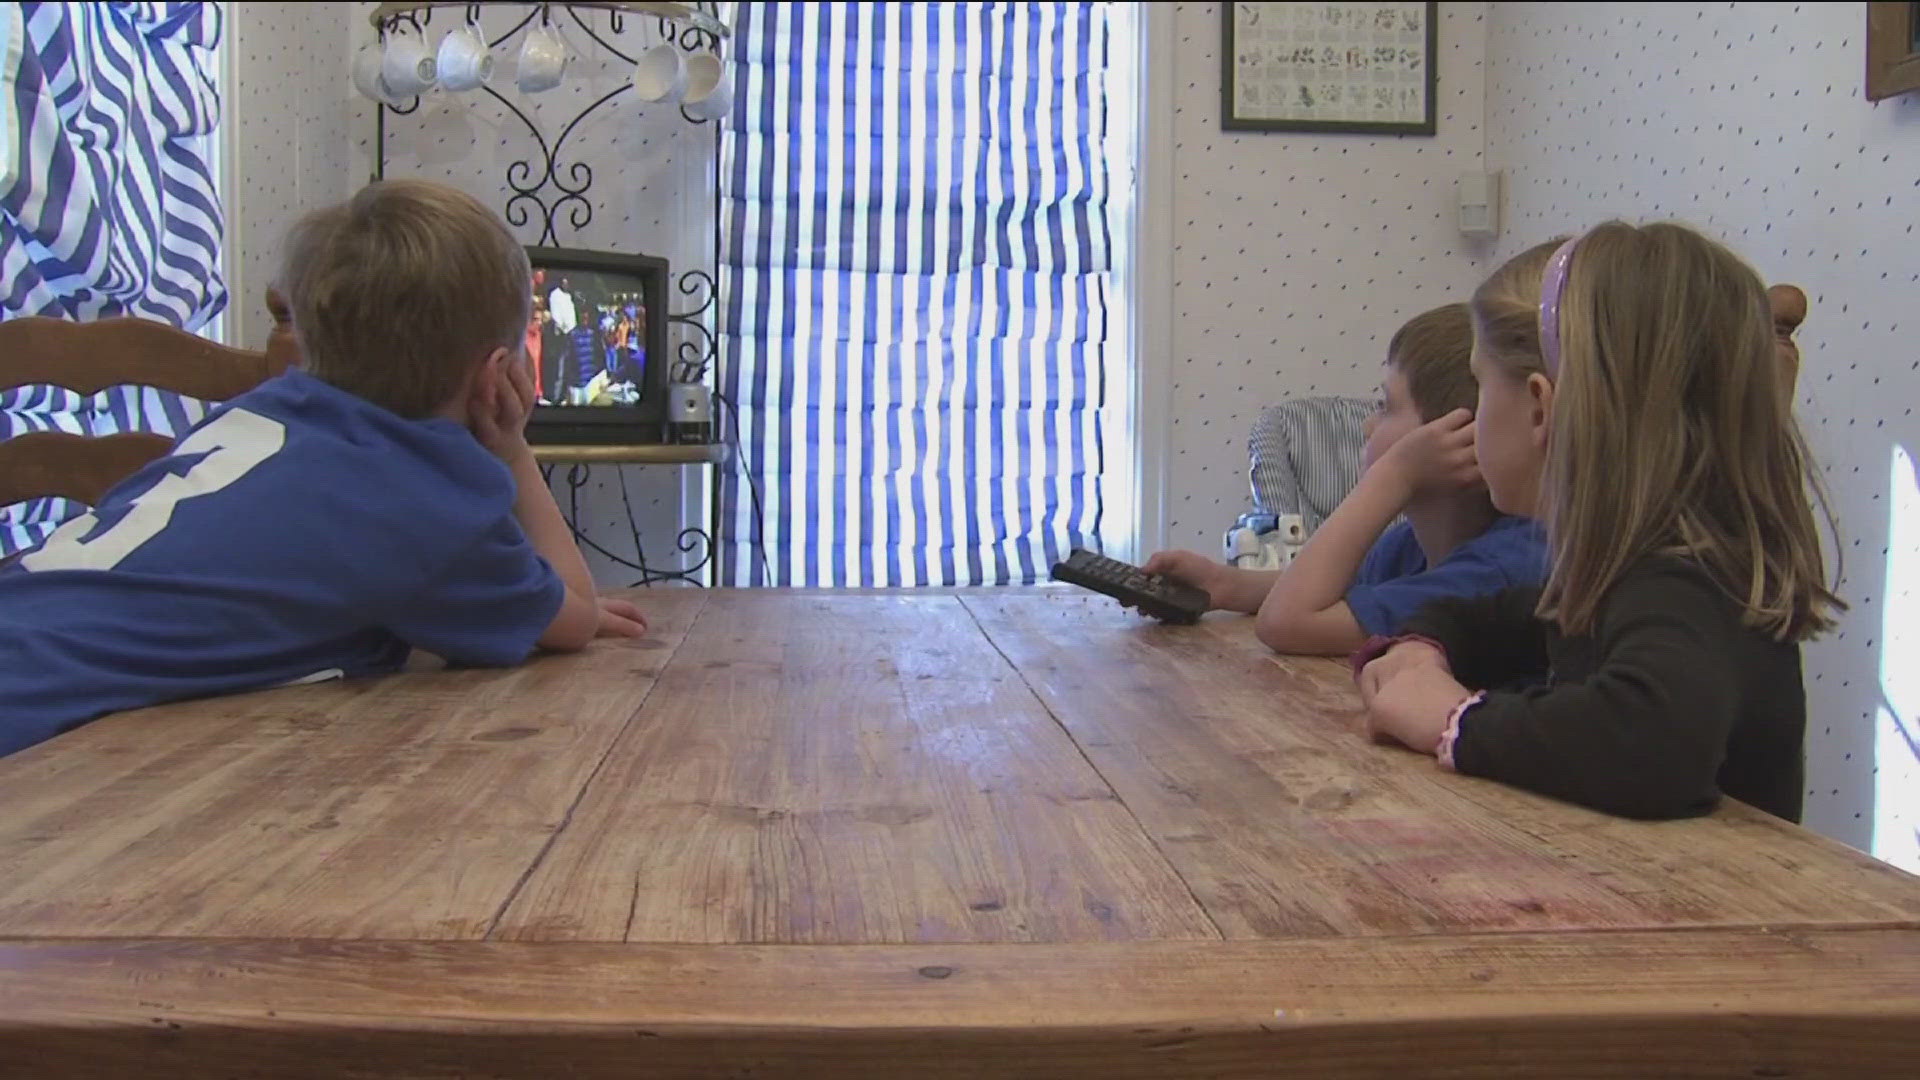 Health experts say children can benefit from boredom by learning problem-solving skills.